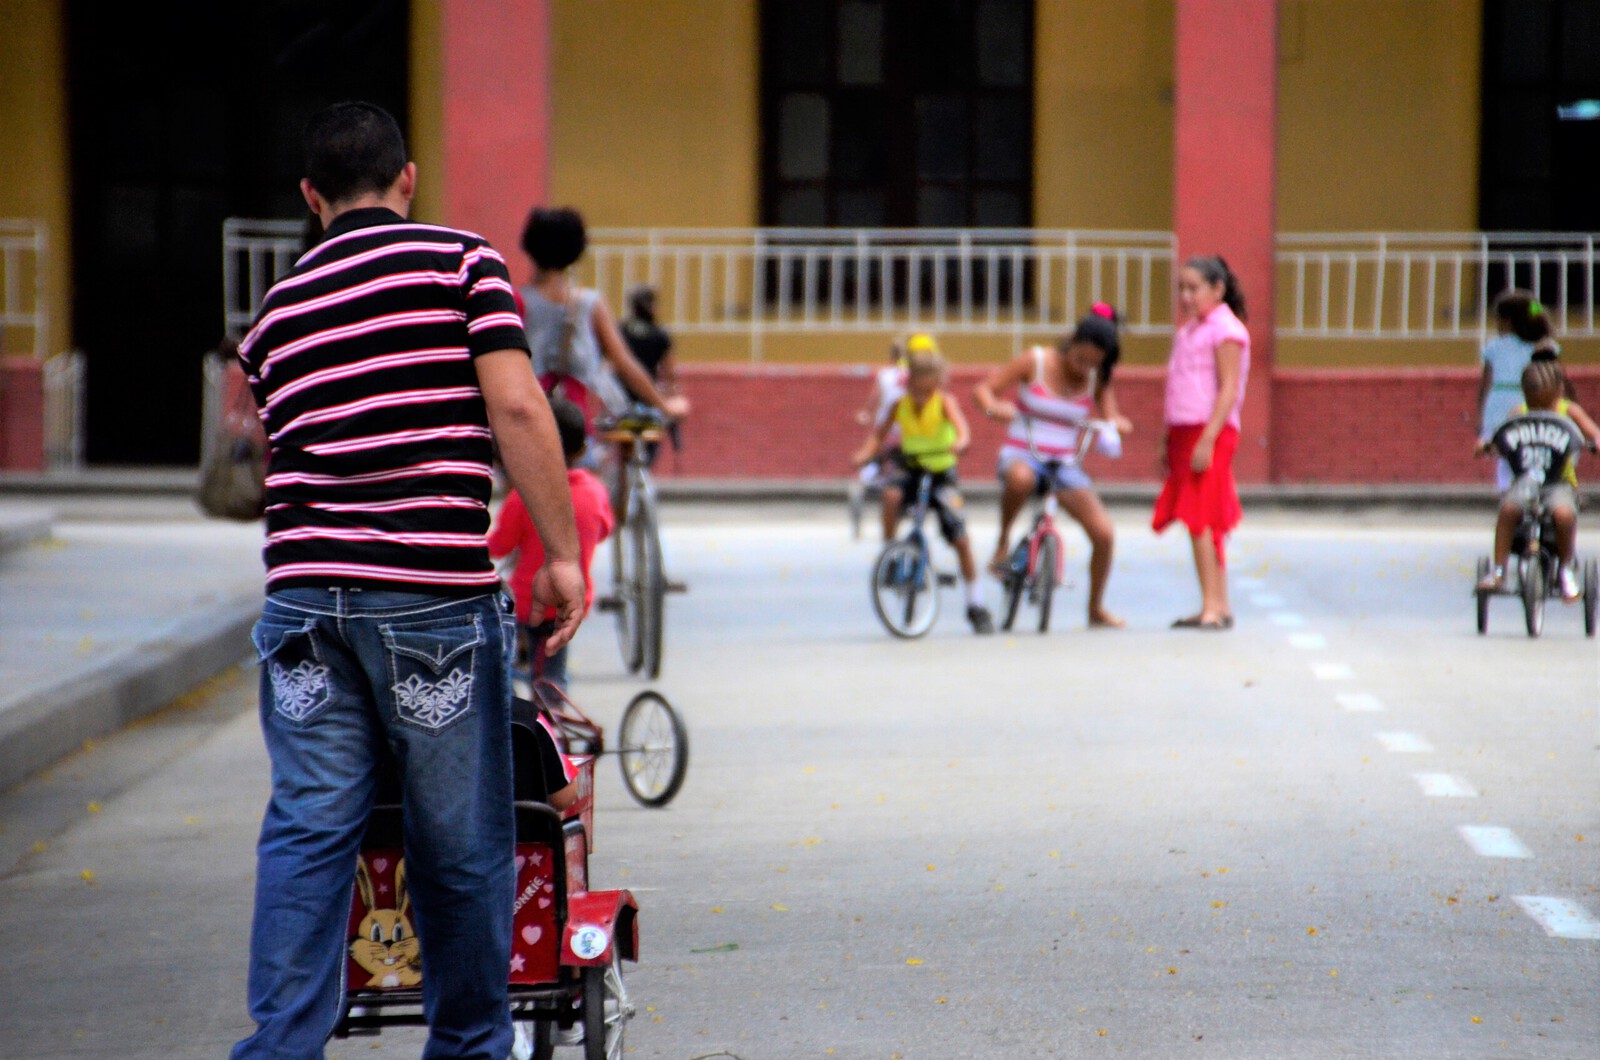 Humans of the world 20/Cuba